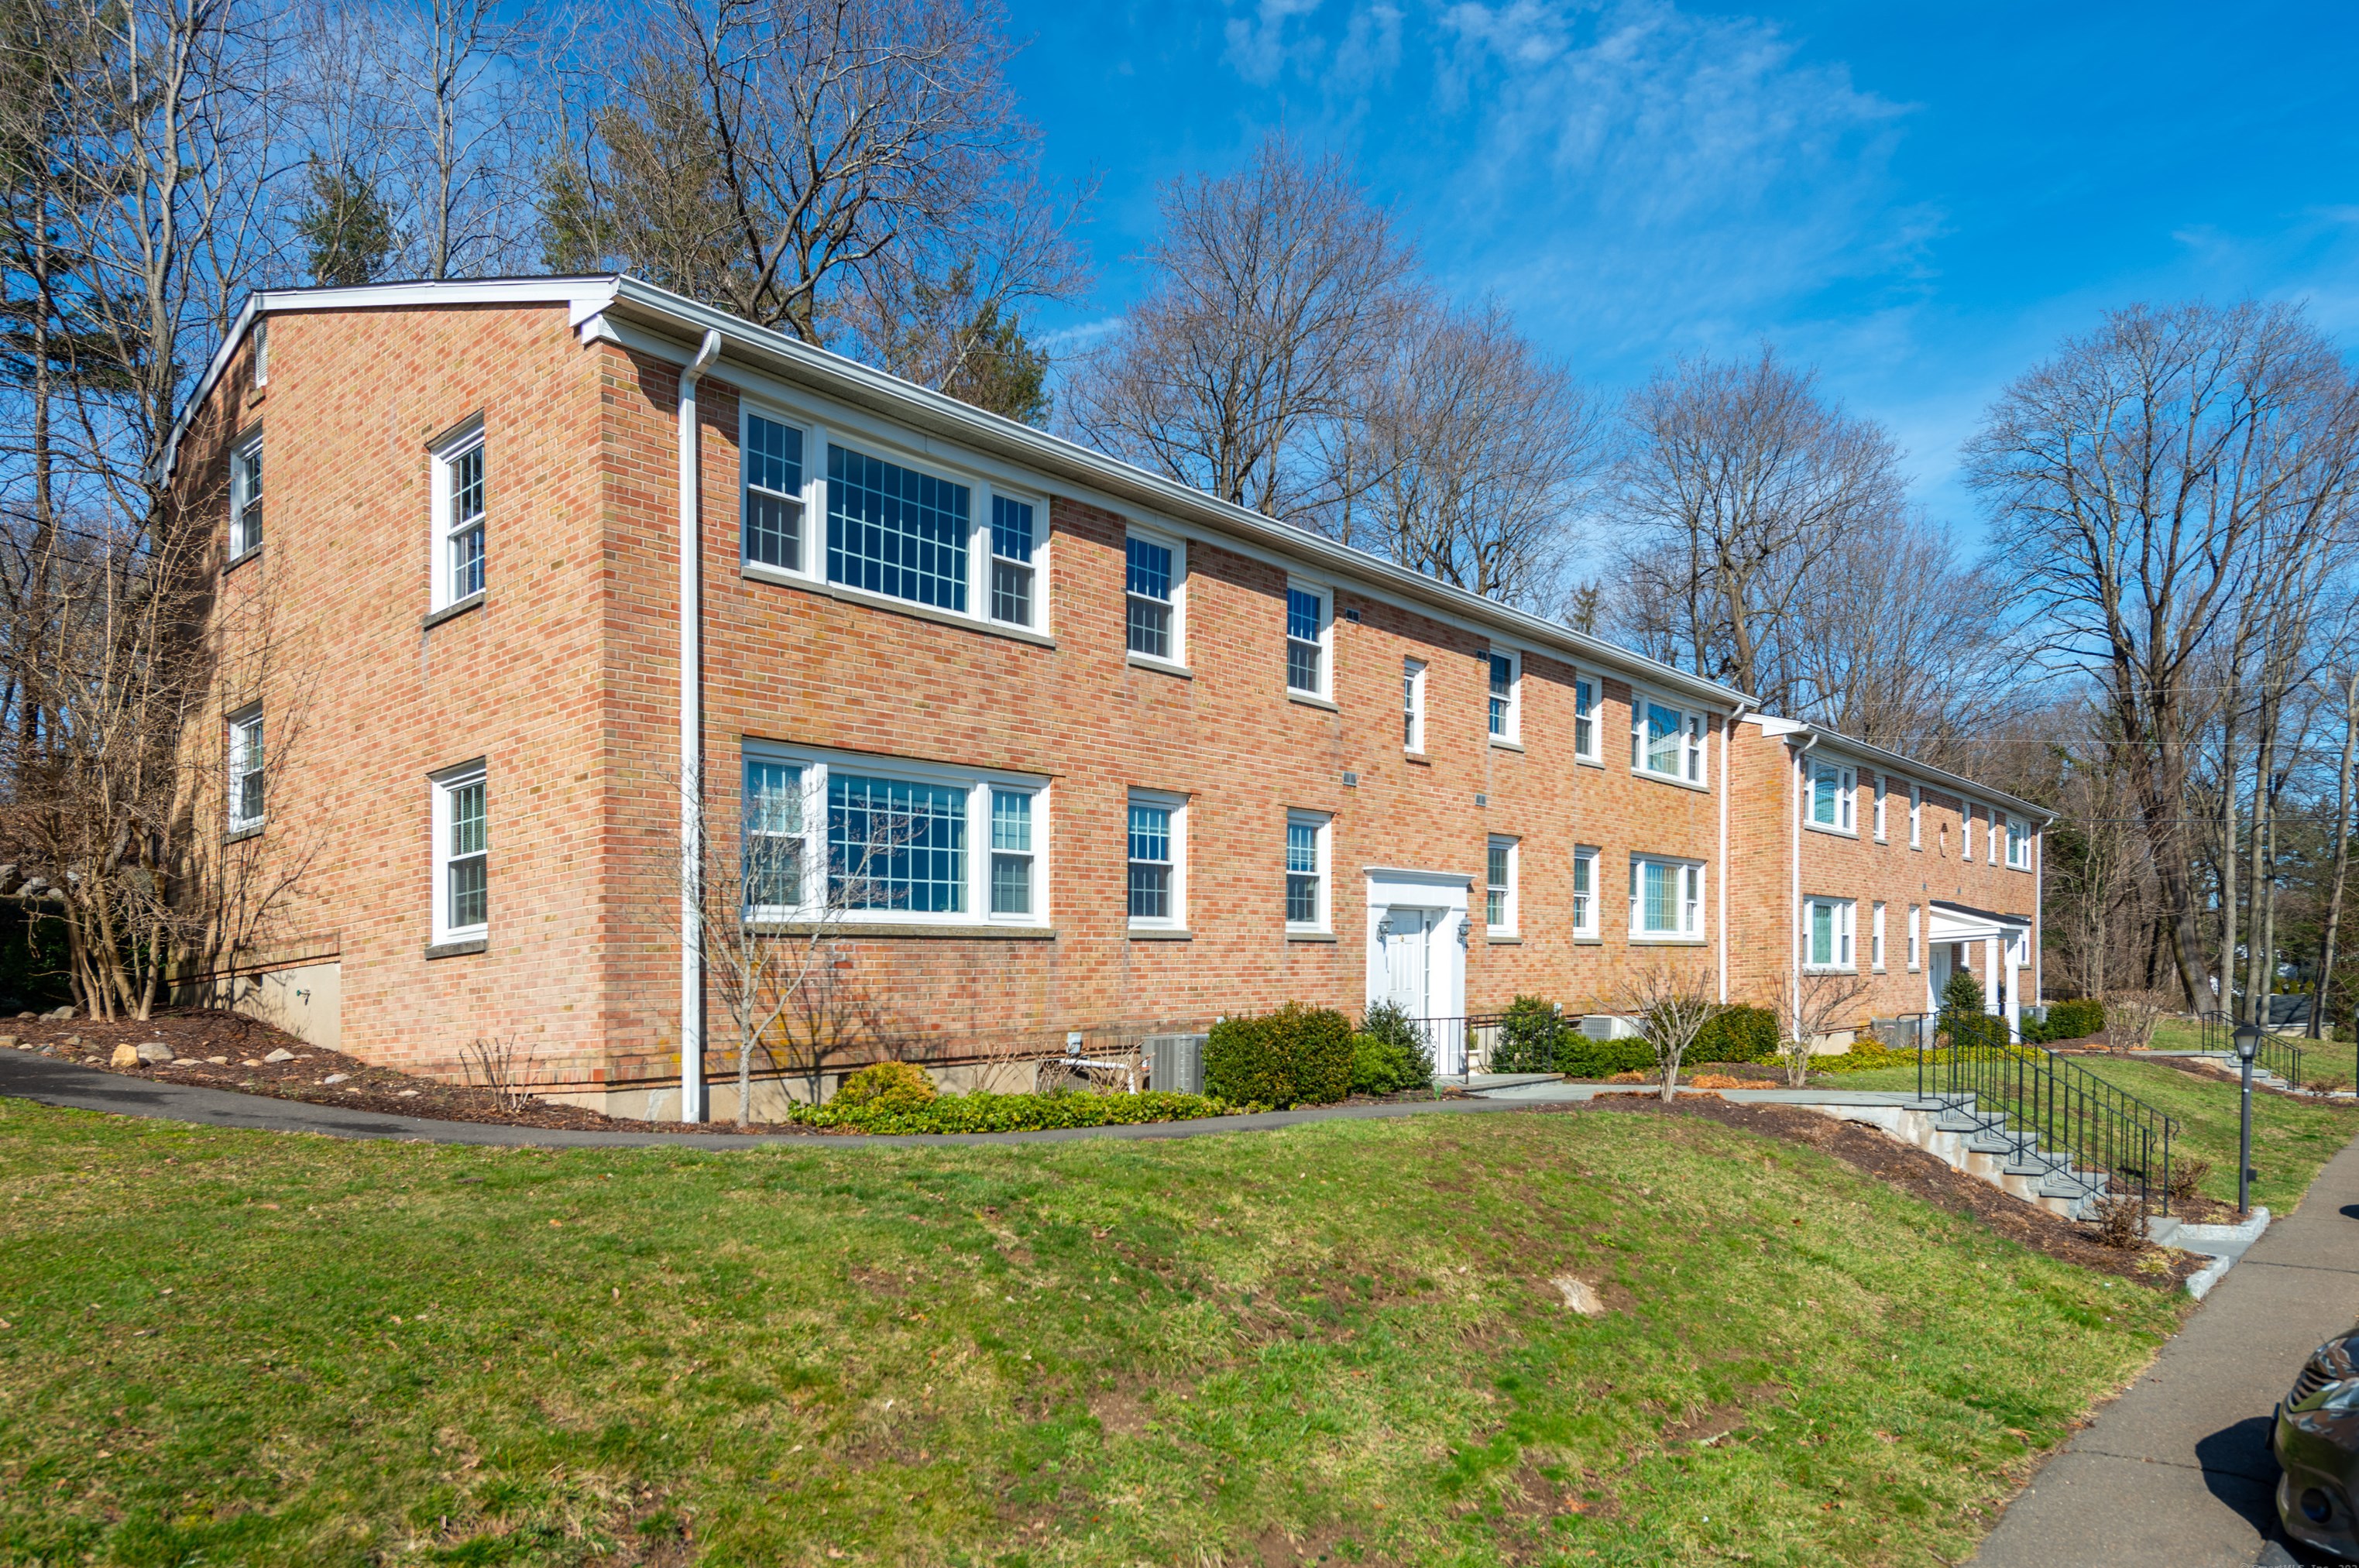 76 Heritage Hill Rd #apt C, New Canaan, CT 06840